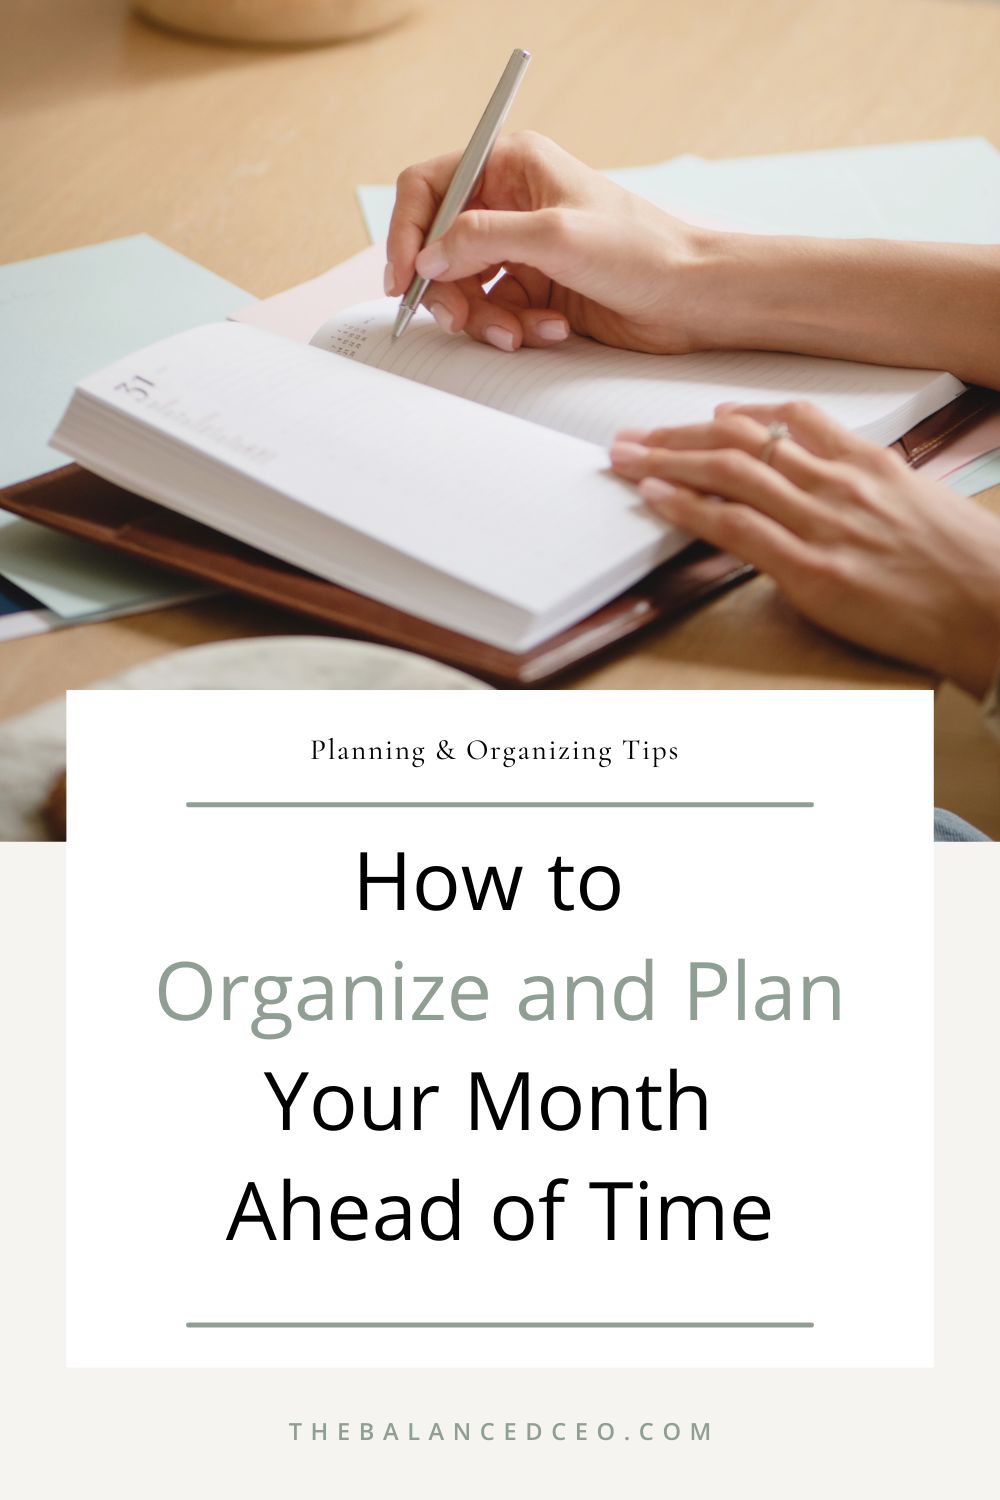 How to Organize and Plan Your Month Ahead of Time